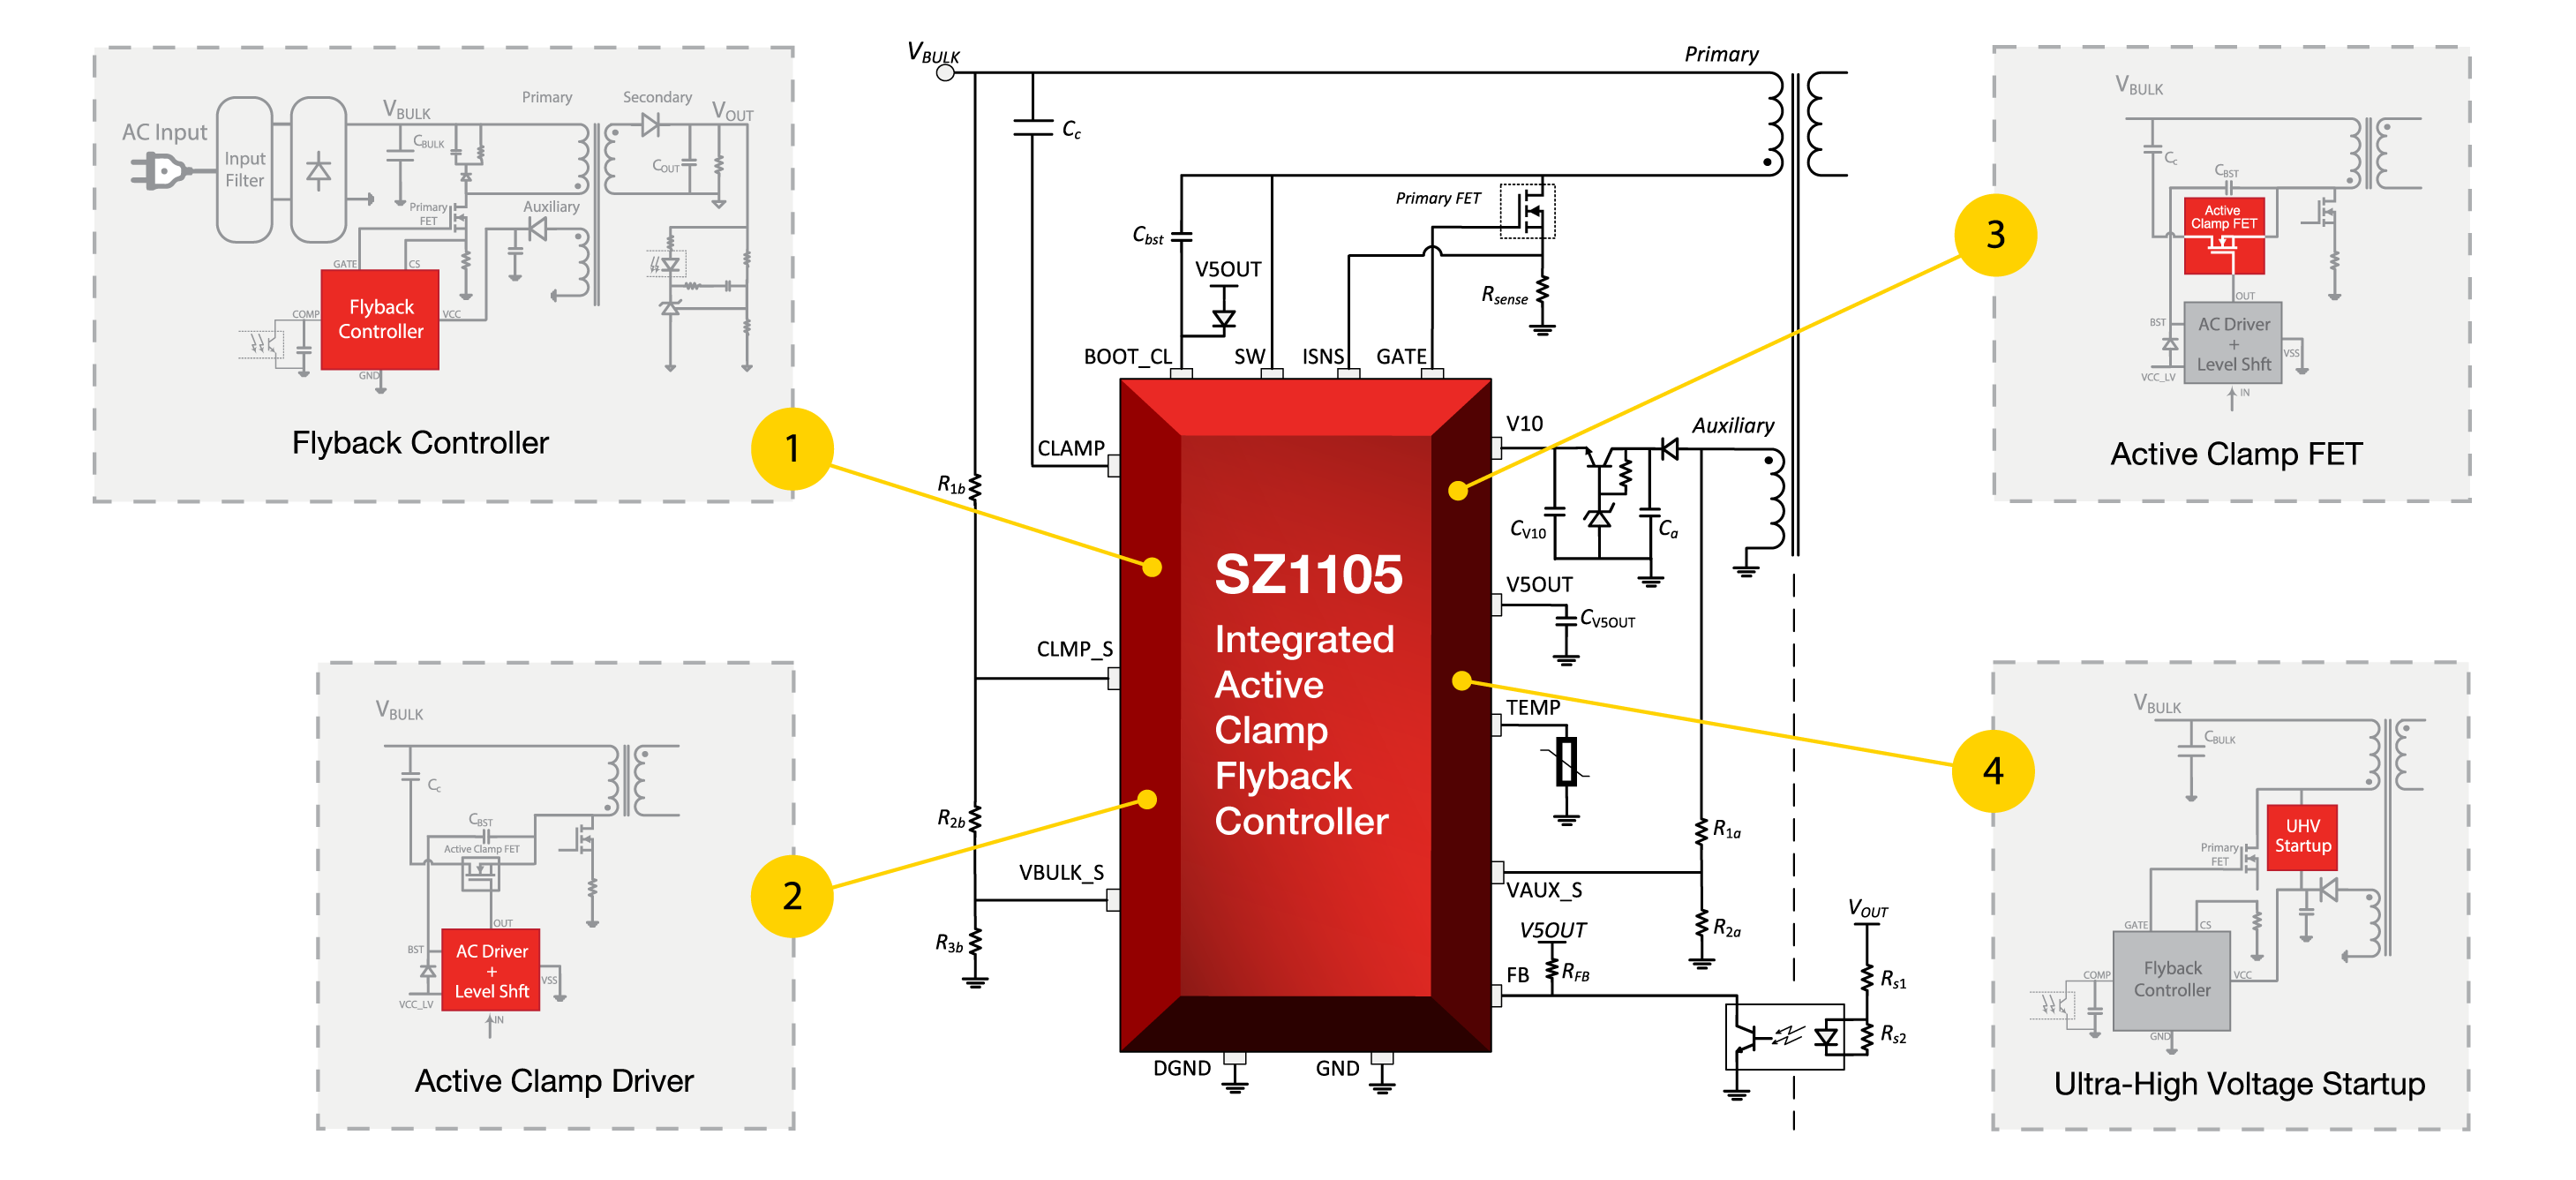 SZ1105 60W controller combines four key ACF components: an adaptive digital ACF controller and three UHV components – an active clamp MOSFET, an active clamp FET driver and a startup voltage regulator